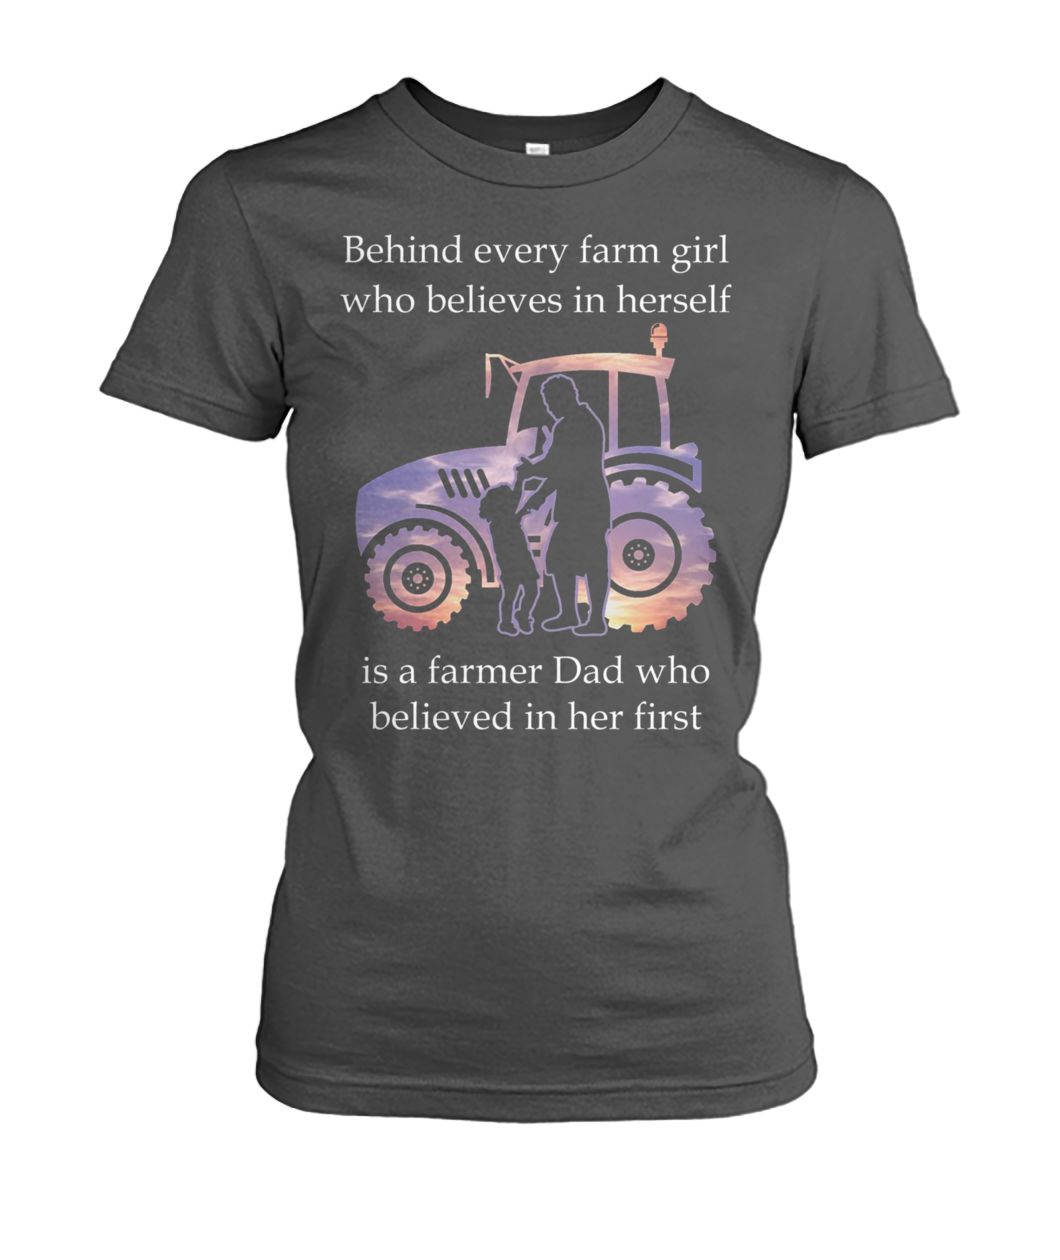 Behind every farm girl who believes in herself is a farmer dad who believed in her first women's crew tee